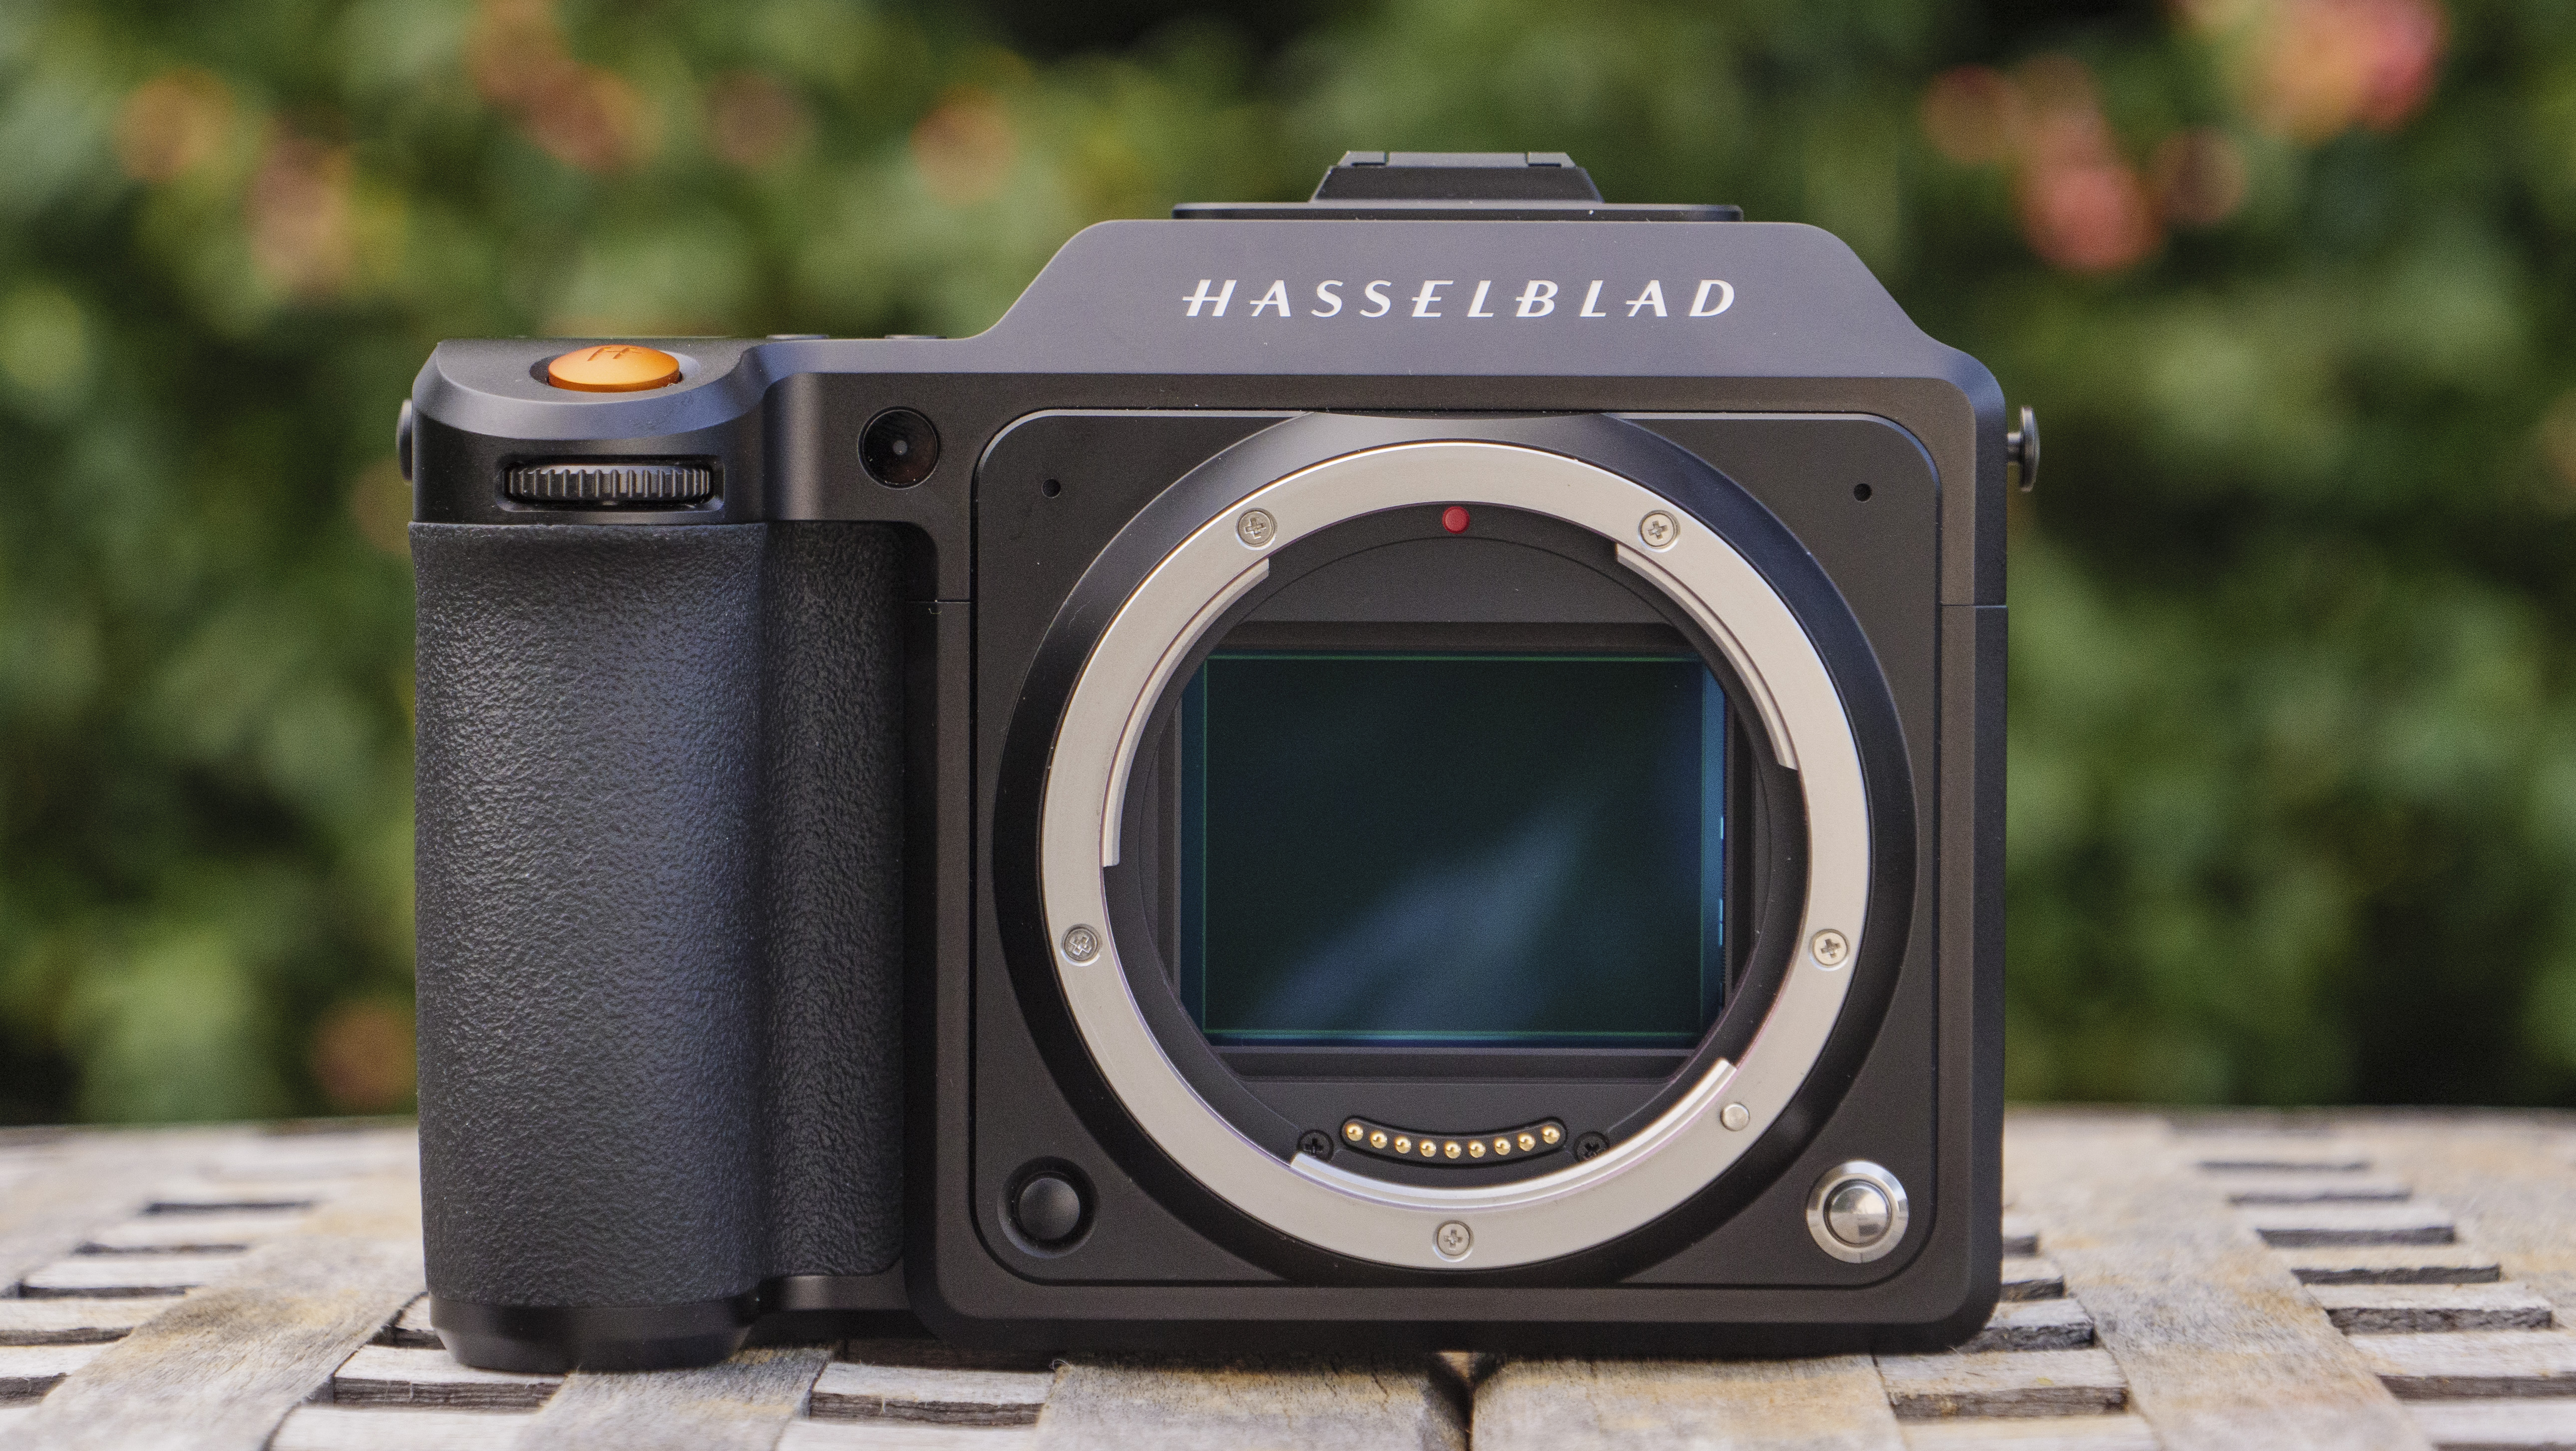 The Hasselblad X2D 100C camera front with no lens revealing image sensor